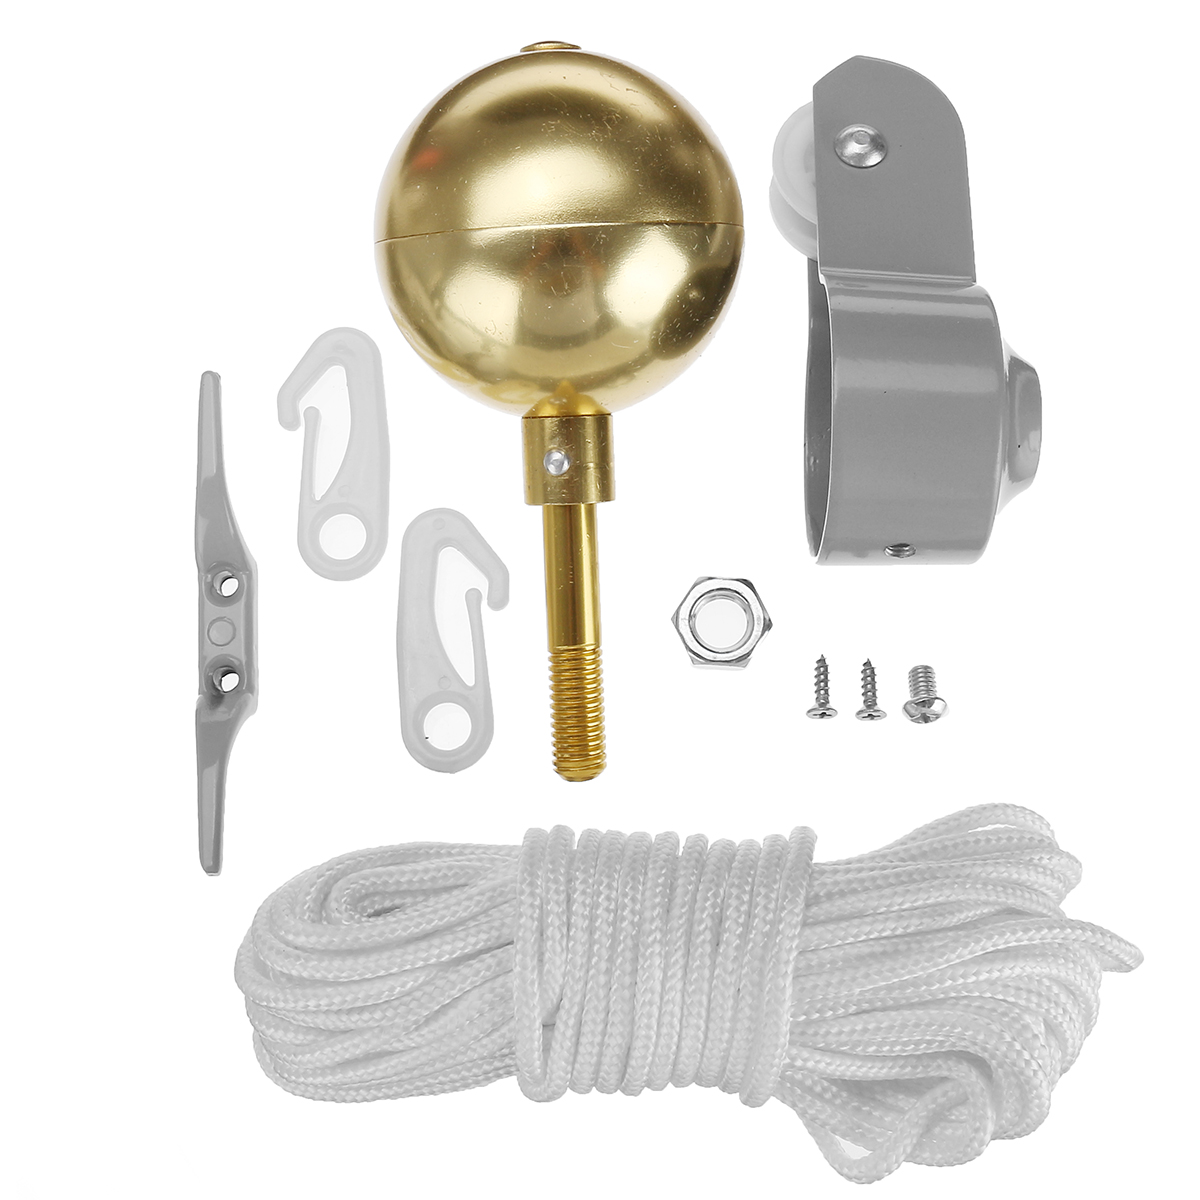 Flag Pole Parts Repair Tool Kits 2Inch Diameter Truck Pulley Gold Ball Cleat Halyard Rope